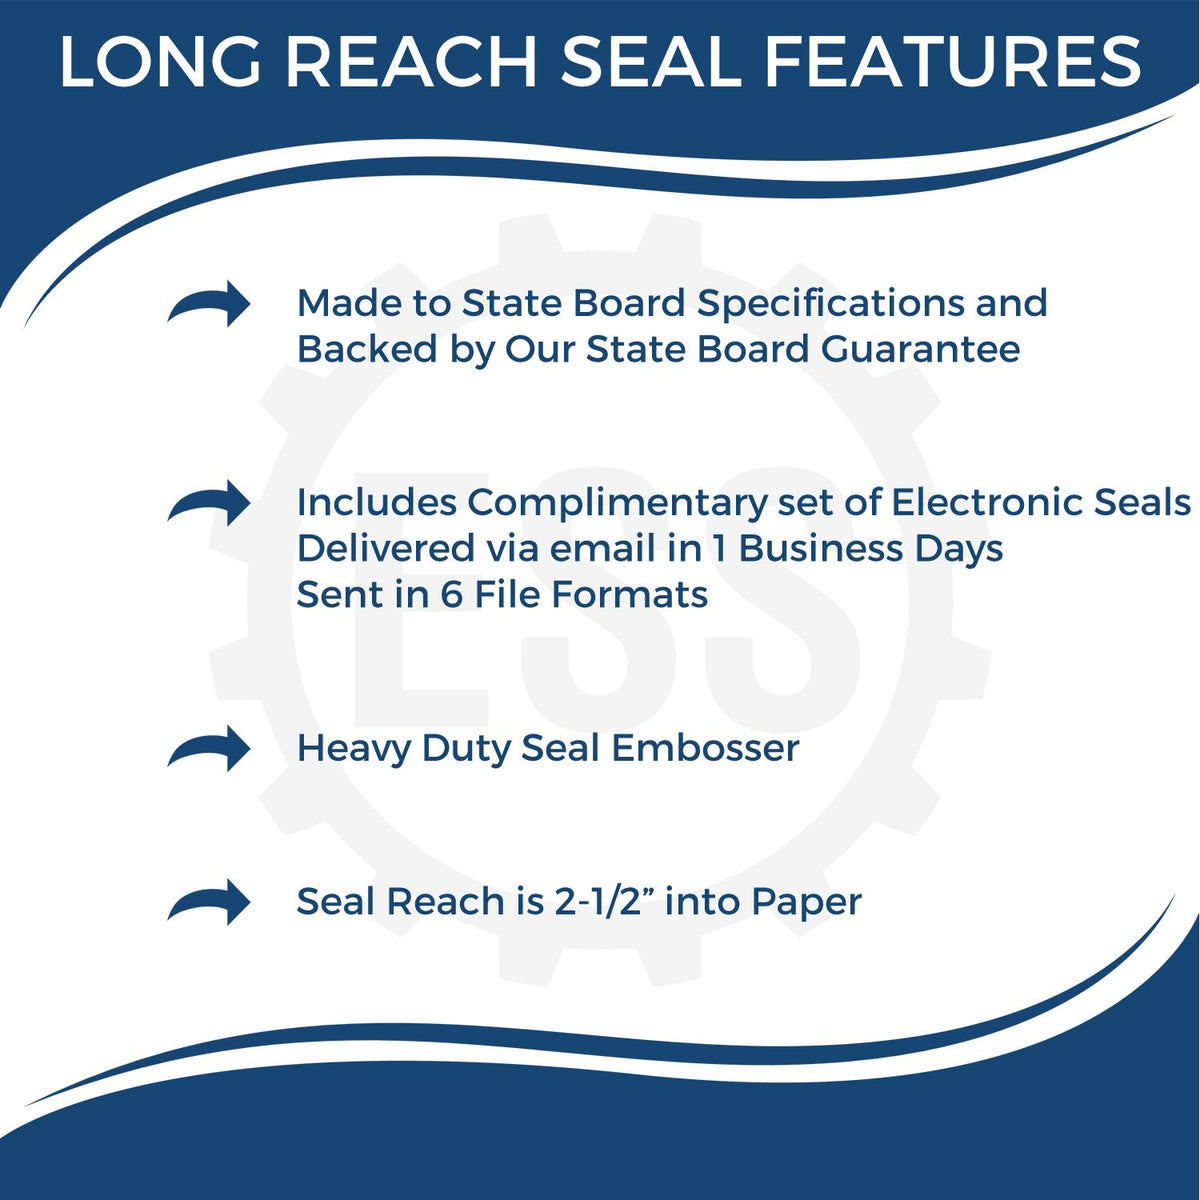 A picture of an infographic highlighting the selling points for the Long Reach Connecticut Land Surveyor Seal